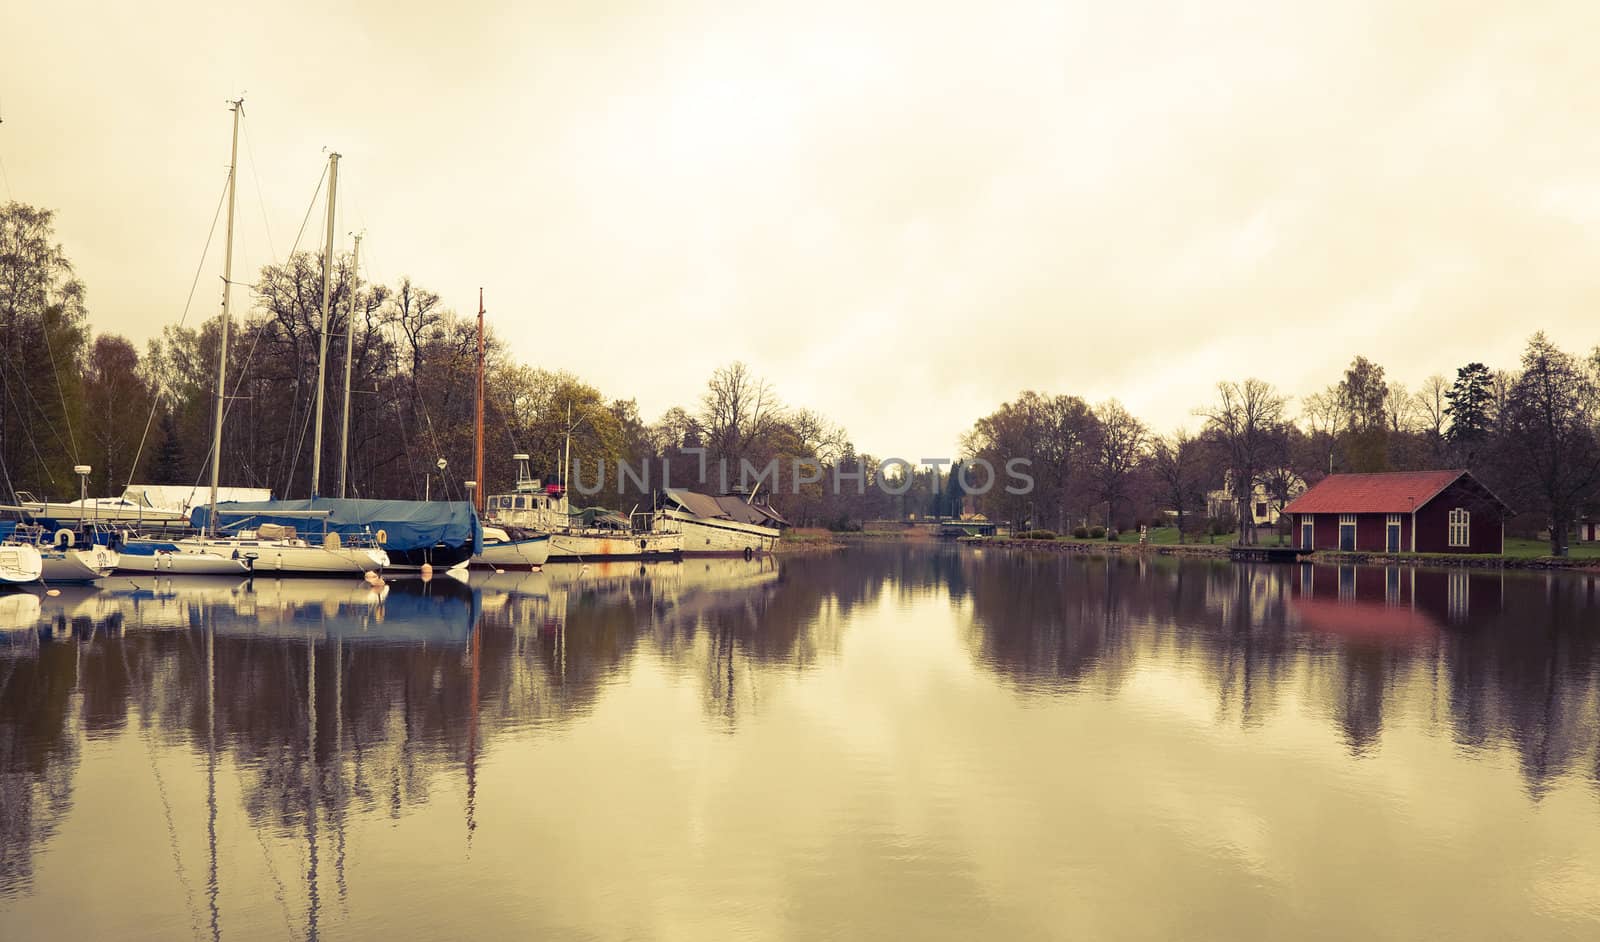 Tranquil scenery from the Gota Canal Sweden. Cross processed to give a retro look. Space for text.